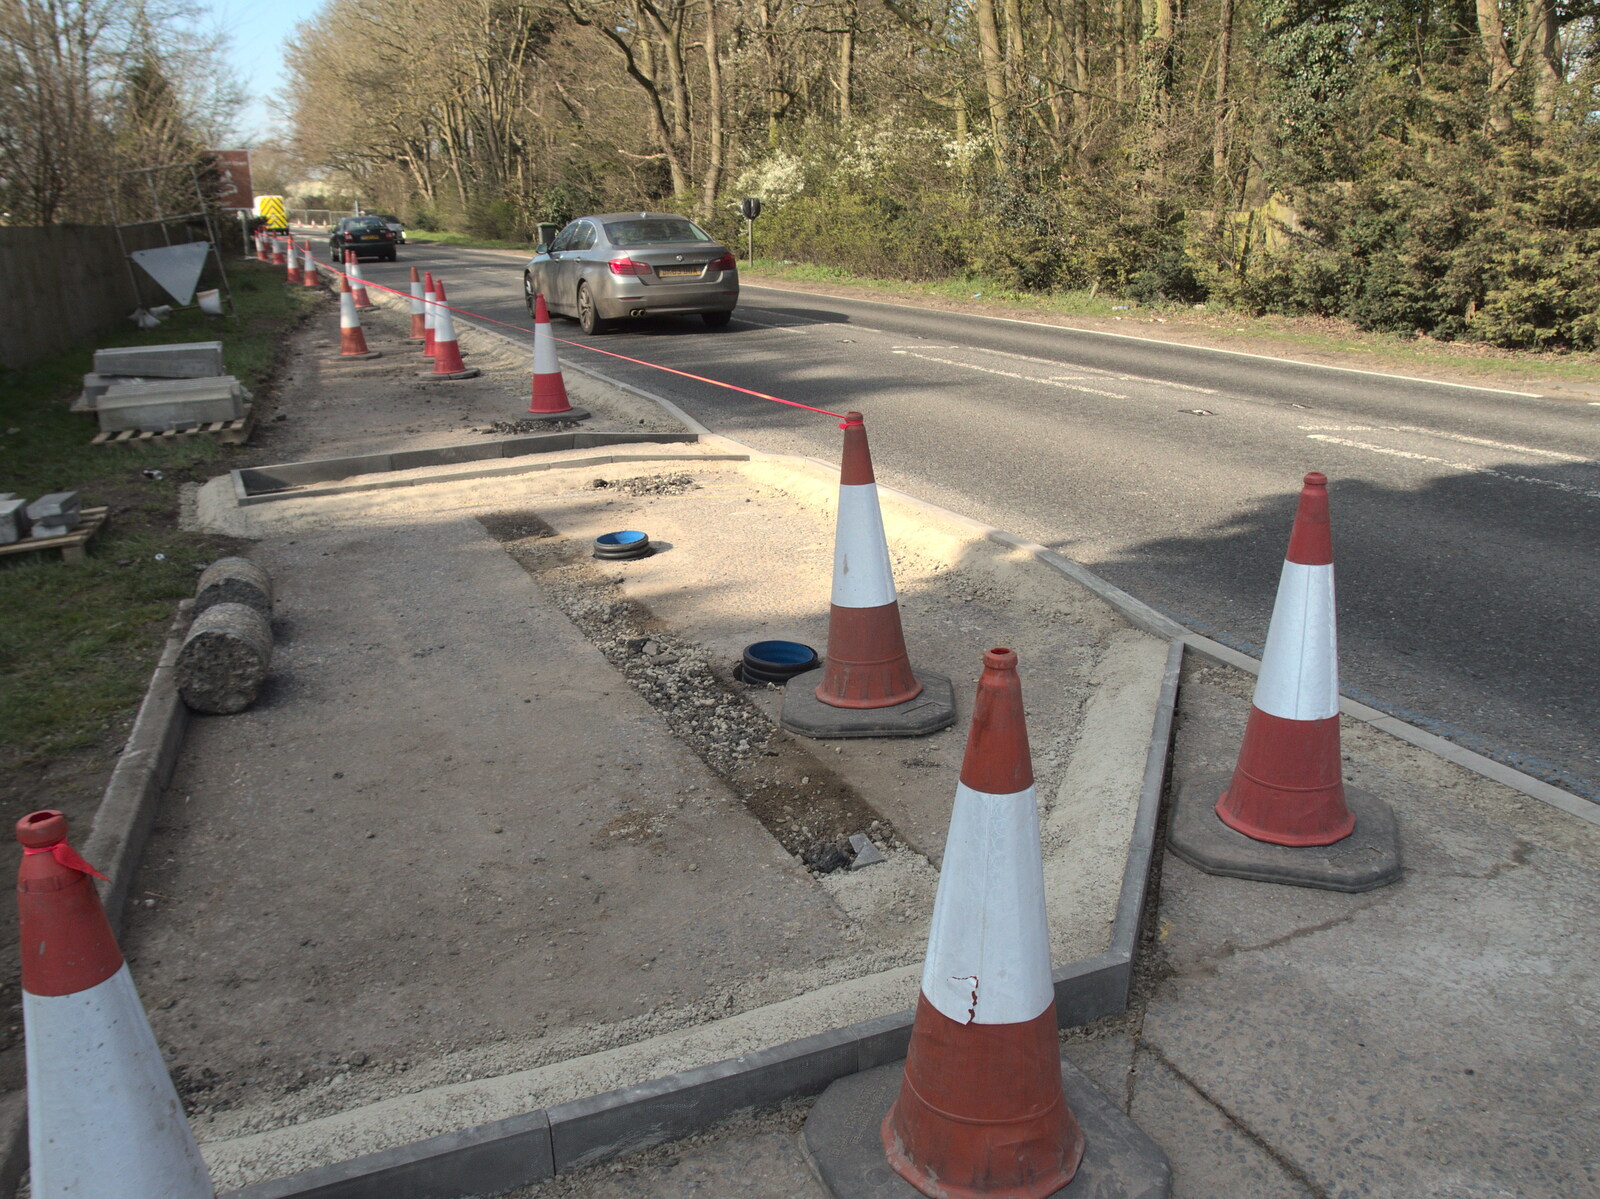 There's a small cycle exit from Roadworks and Harry's Trampoline, Brome, Suffolk - 6th April 2021